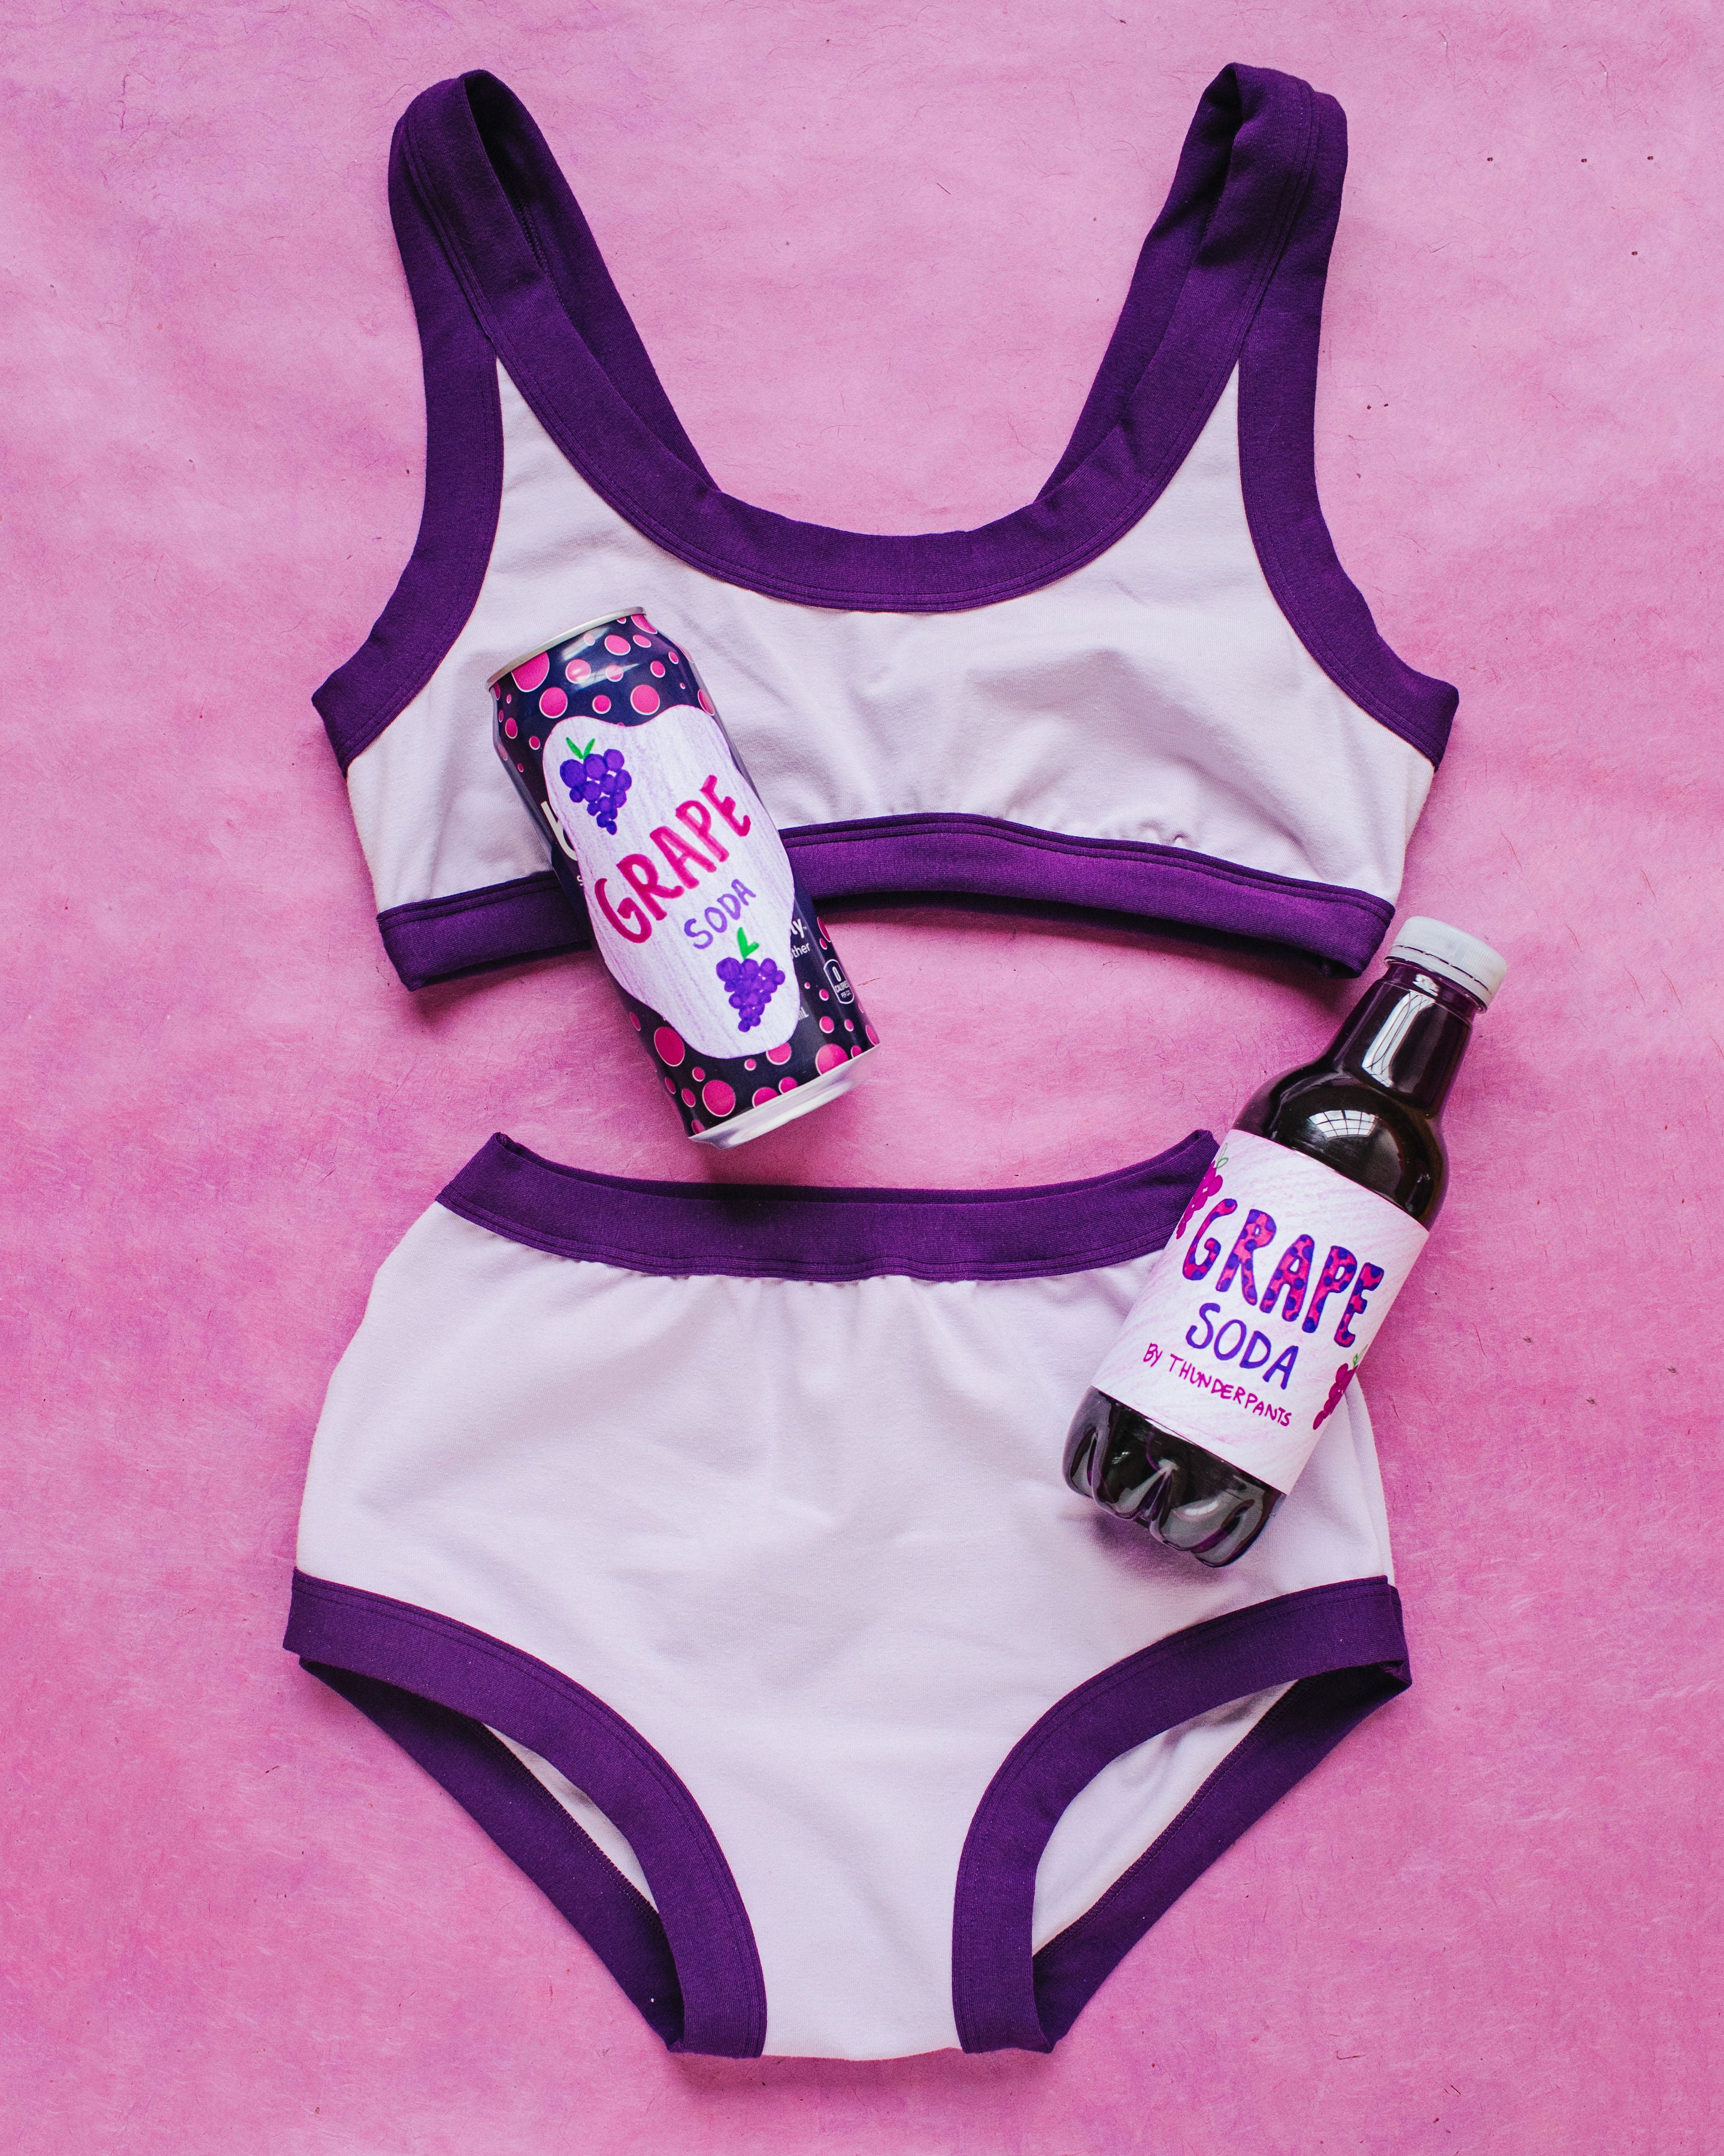 Flat lay with grape soda cans on purple surface of Grape Soda Bralette and Original style underwear set: light lavender with dark purple binding.